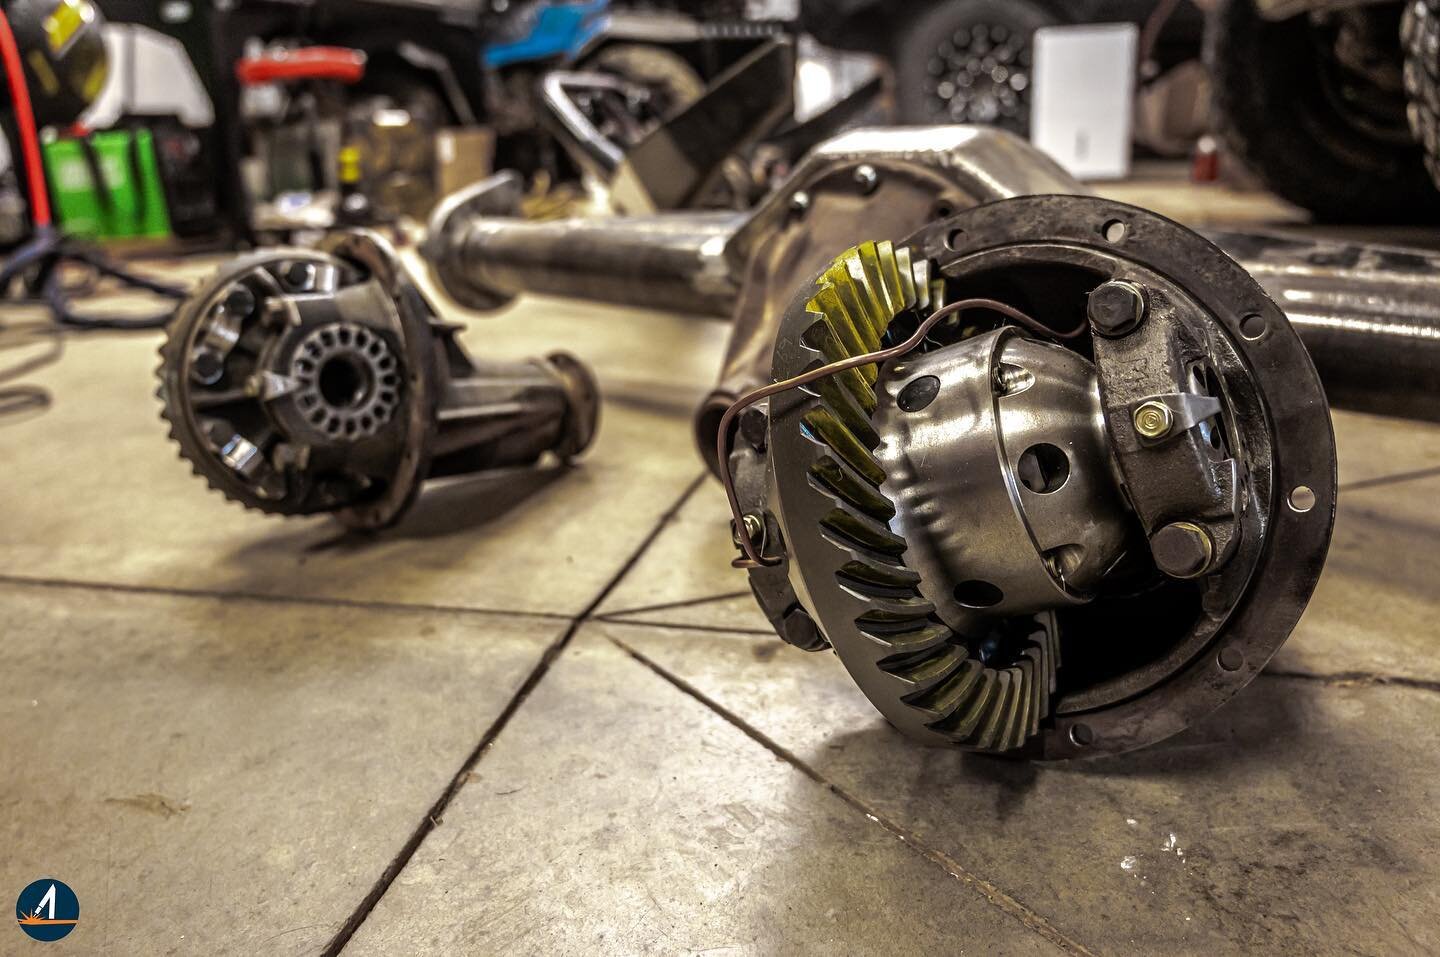 Need a re-gear or custom axle housing? We&rsquo;ve got you covered!😎 Shoot us an email or DM with any questions and a quote!
&mdash;&mdash;&mdash;
&mdash;&mdash;&mdash;
&mdash;&mdash;&mdash;
#toyota #jeep #ford #dodge #nitrogears #tundra #4runner #t